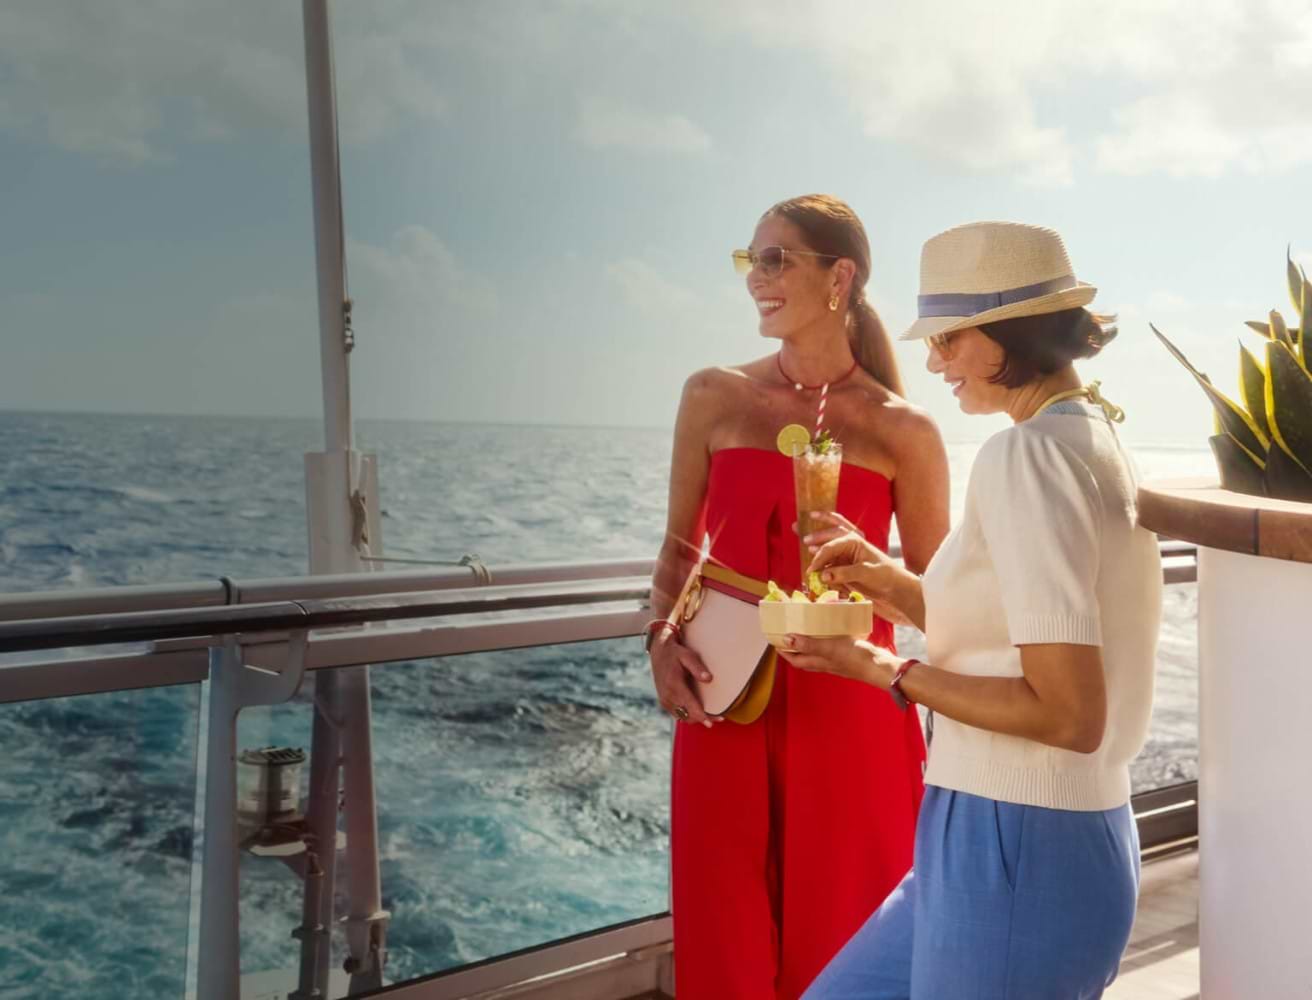 Virgin Voyages In/Out of Miami on Scarlet Lady or Valiant Lady 4-8 Night Caribbean Cruises From $99 Per Night Travel December - Book by November 28, 2022